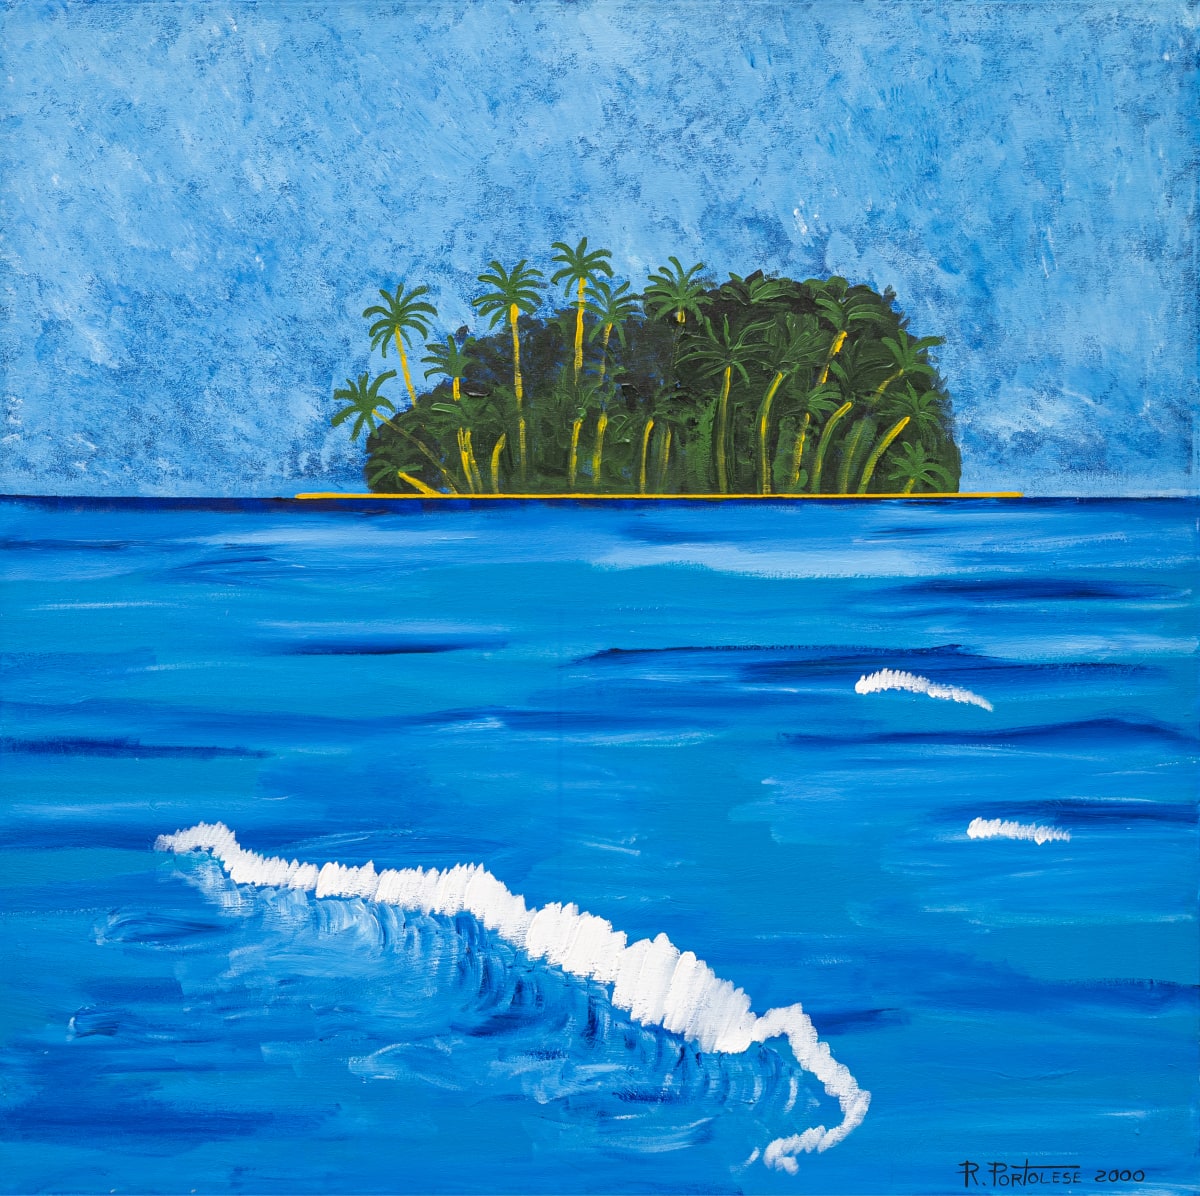 Tropical Island by Roberto Portolese / Studio Azzurro  Image: Paintings are only available in canvas limited edition prints.